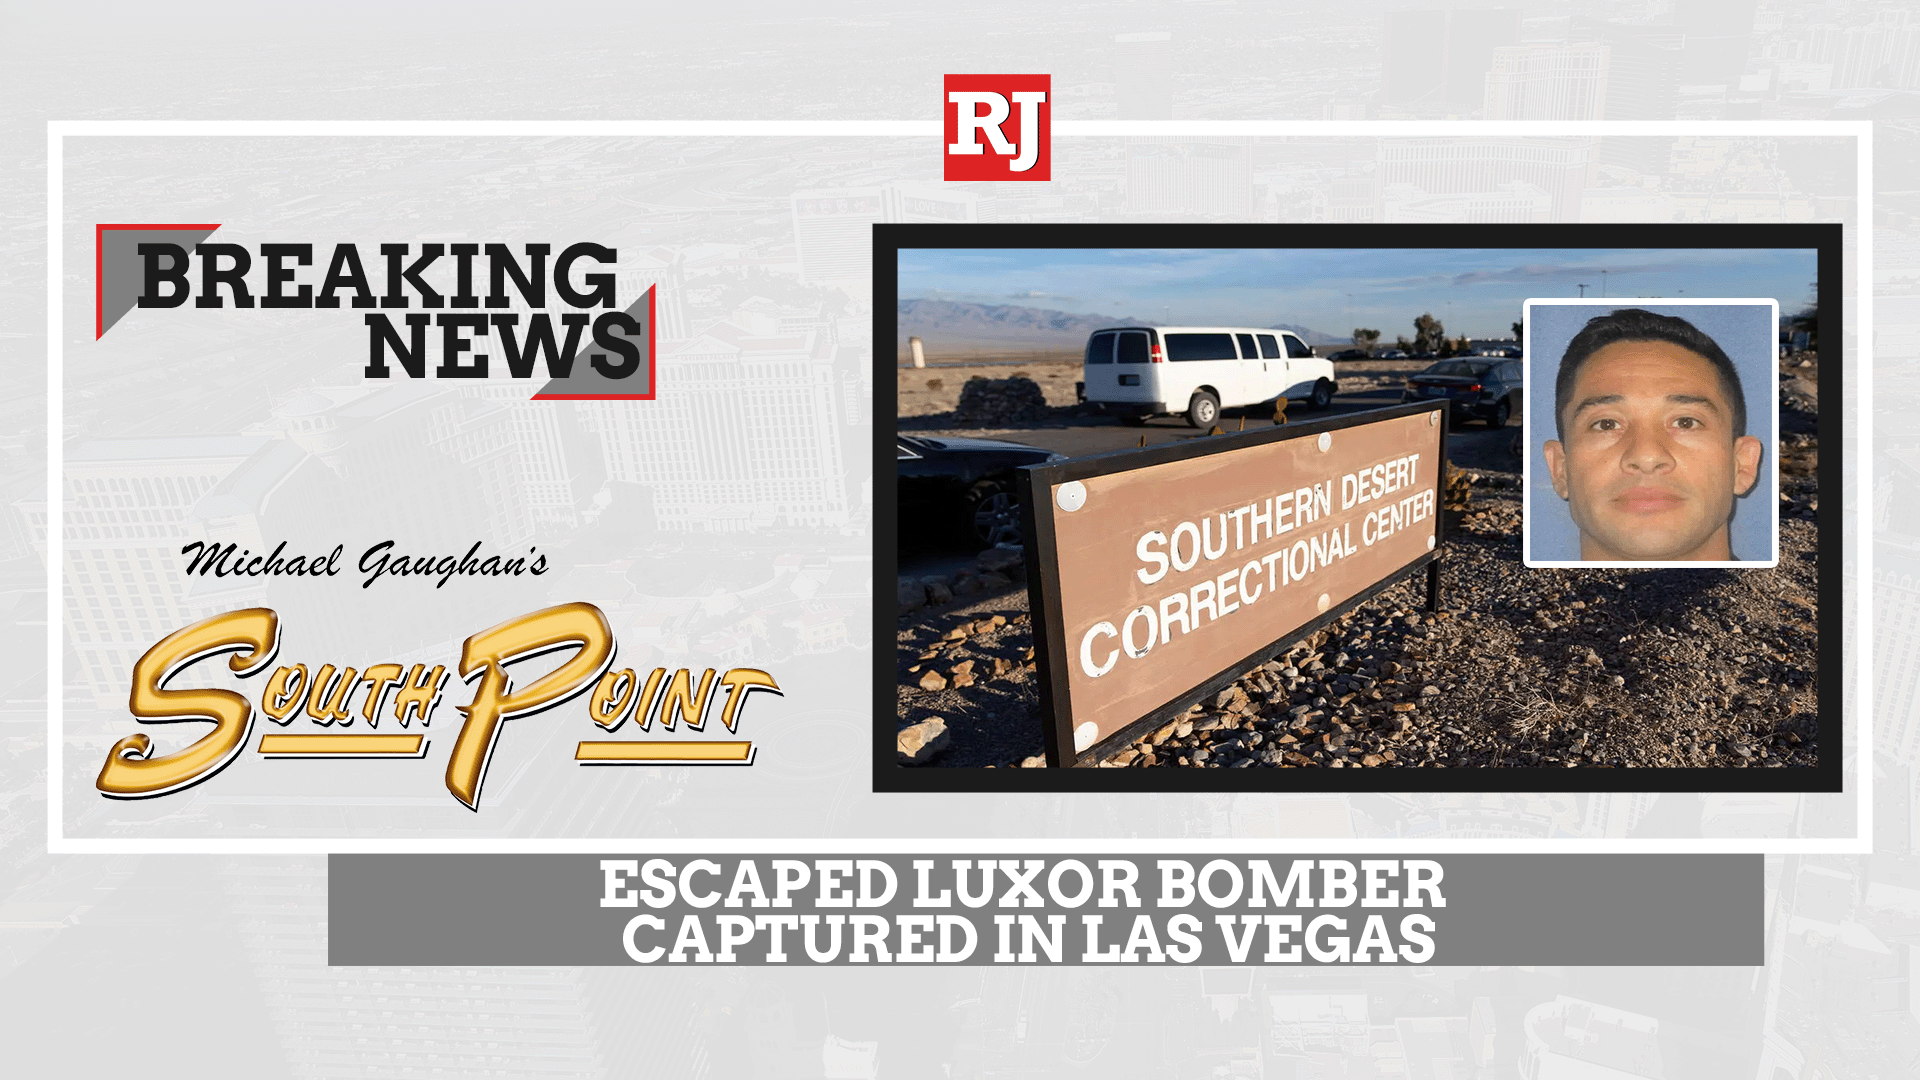 LIVE: Officials provide update on escaped Luxor bomber captured in Las Vegas